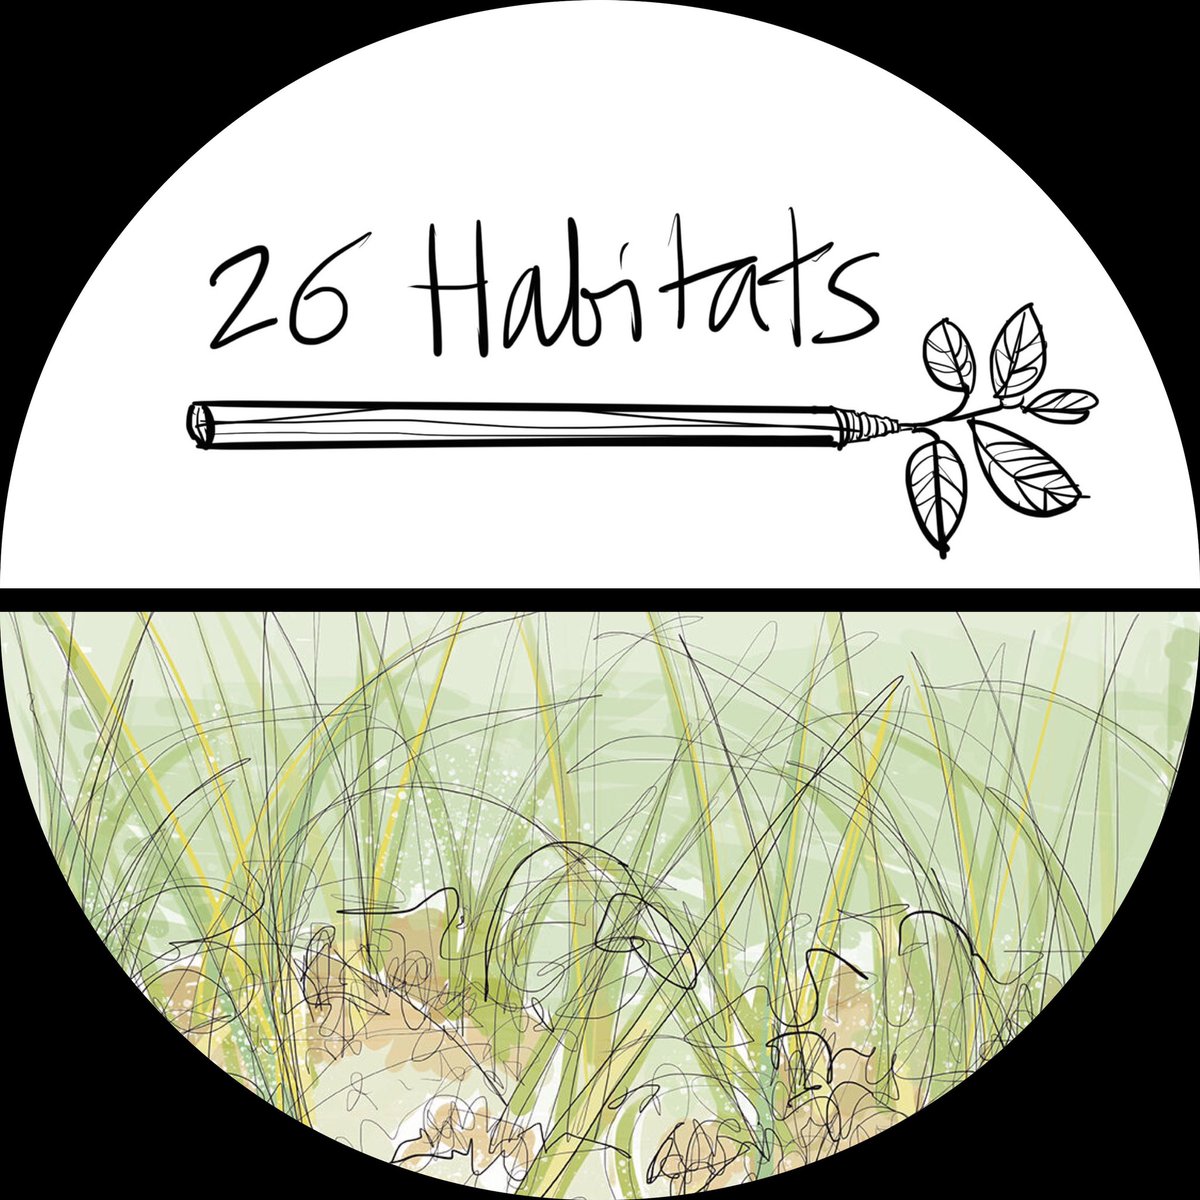 As part of the #26Habitats centena & essay series in collaboration with @WildlifeTrusts as I take a look into the aquatic world of the ‘Seagrass Meadows’

bit.ly/3hq02zN

@26characters @EssexWildlife @lydiathornley #SeagrassMeadows #Poetry #WildlifeTrust #rtArtBoost